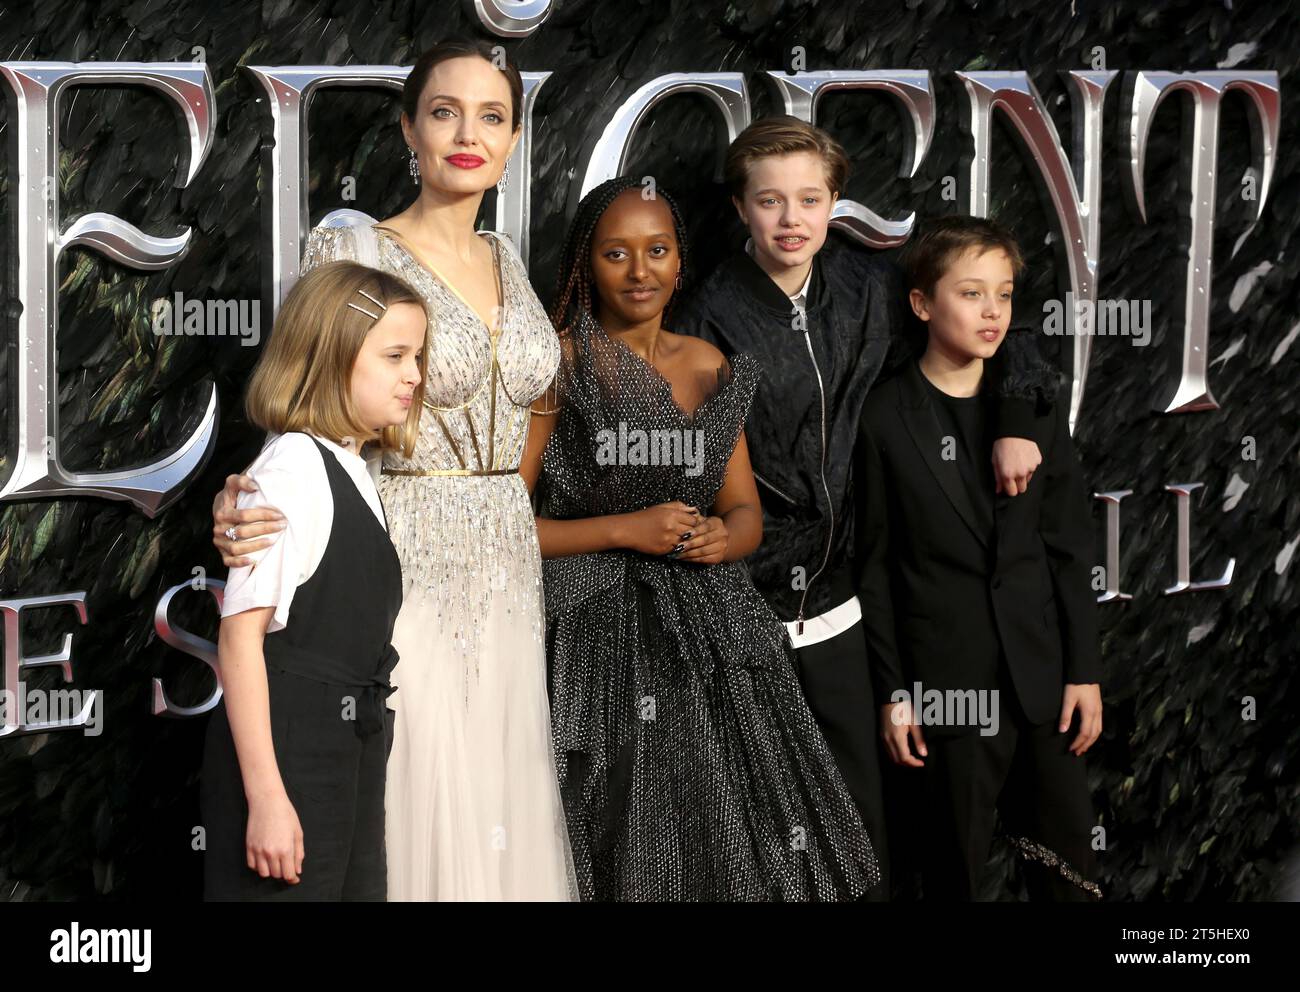 London, UK. 09th Oct, 2019. Vivienne Marcheline Jolie-Pitt, Angelina Jolie, Zahara Marley Jolie-Pitt, Shiloh Nouvel Jolie-Pitt and Knox Jolie-Pitt attend the European premiere of 'Maleficent: Mistress of Evil' at Odeon IMAX Waterloo in London. (Photo by Fred Duval/SOPA Images/Sipa USA) Credit: Sipa USA/Alamy Live News Stock Photo